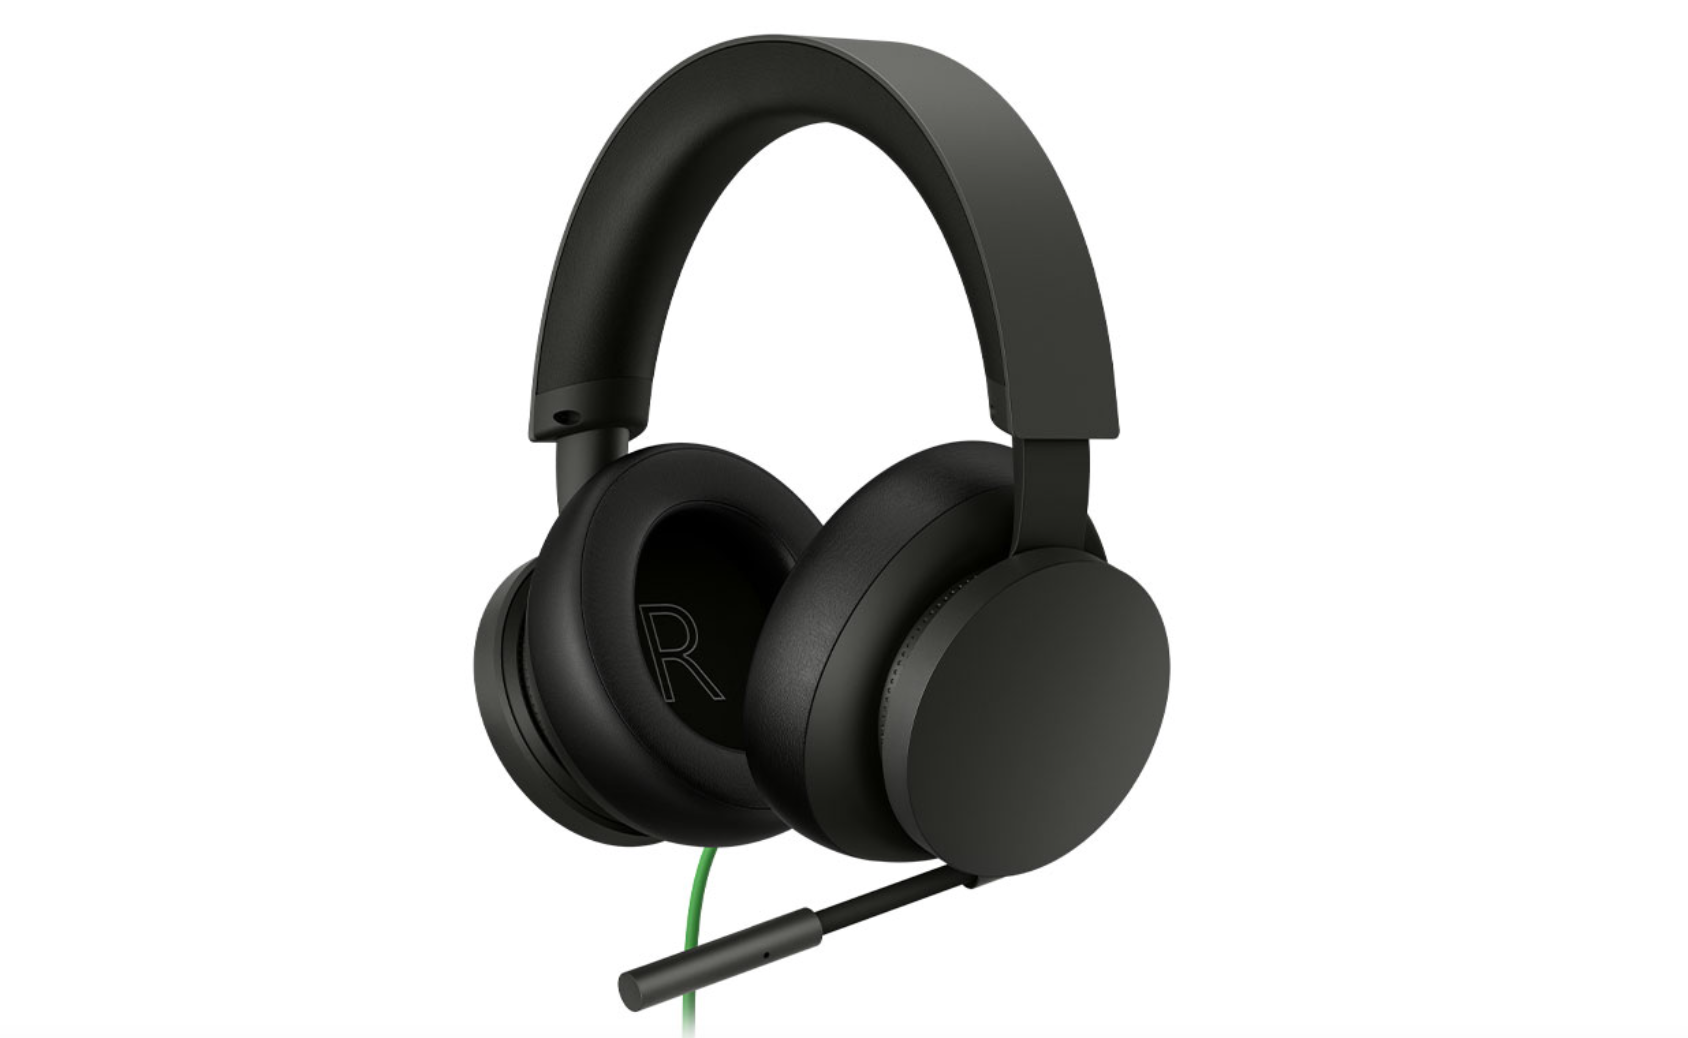 The official Xbox headset just hit a bargain price